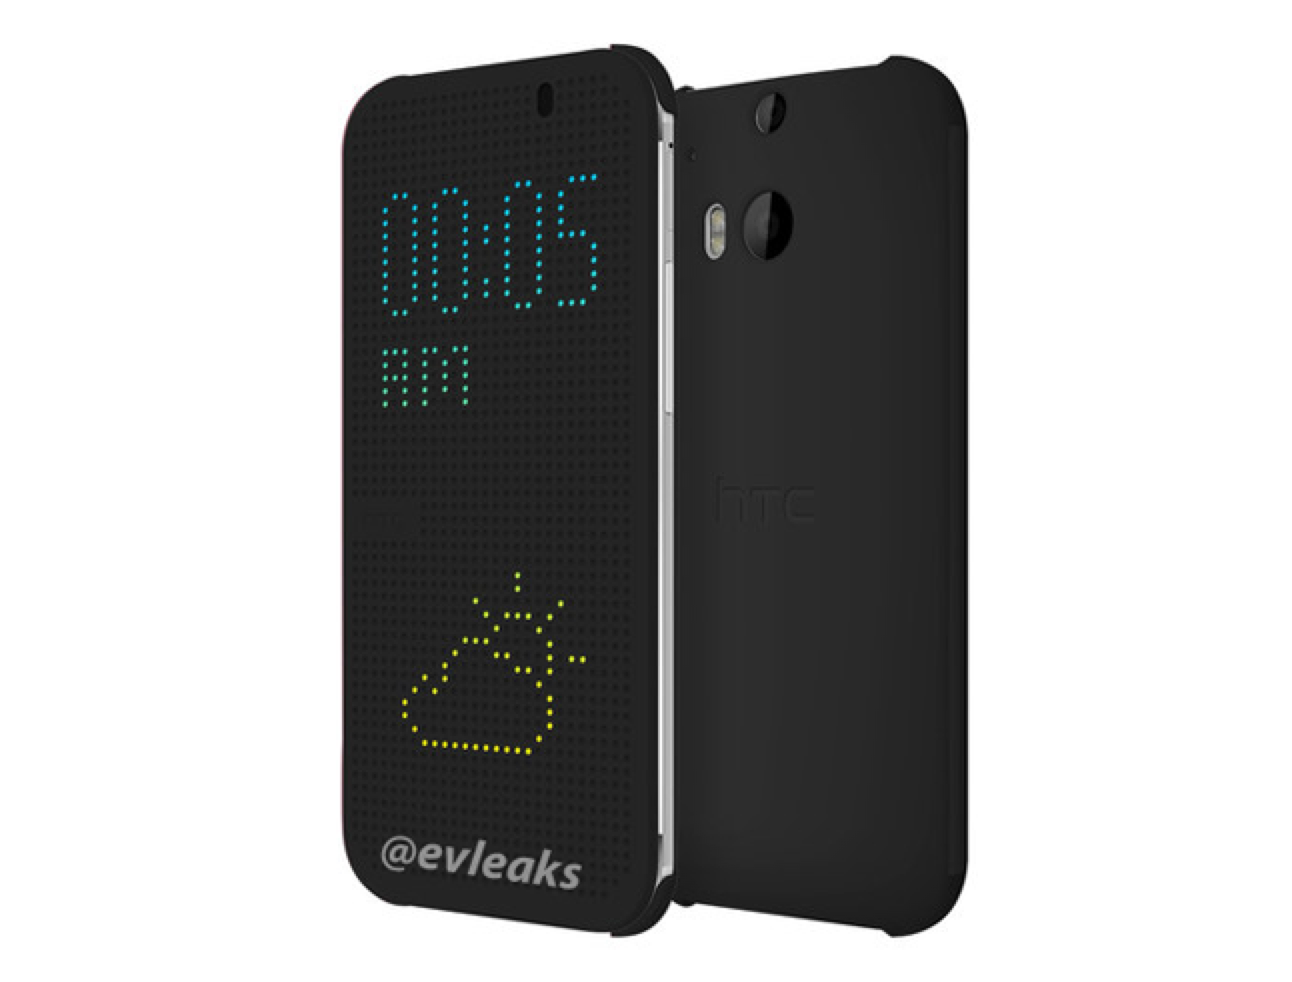 htc to make light up cover available with new htc one showing time and weather image 1